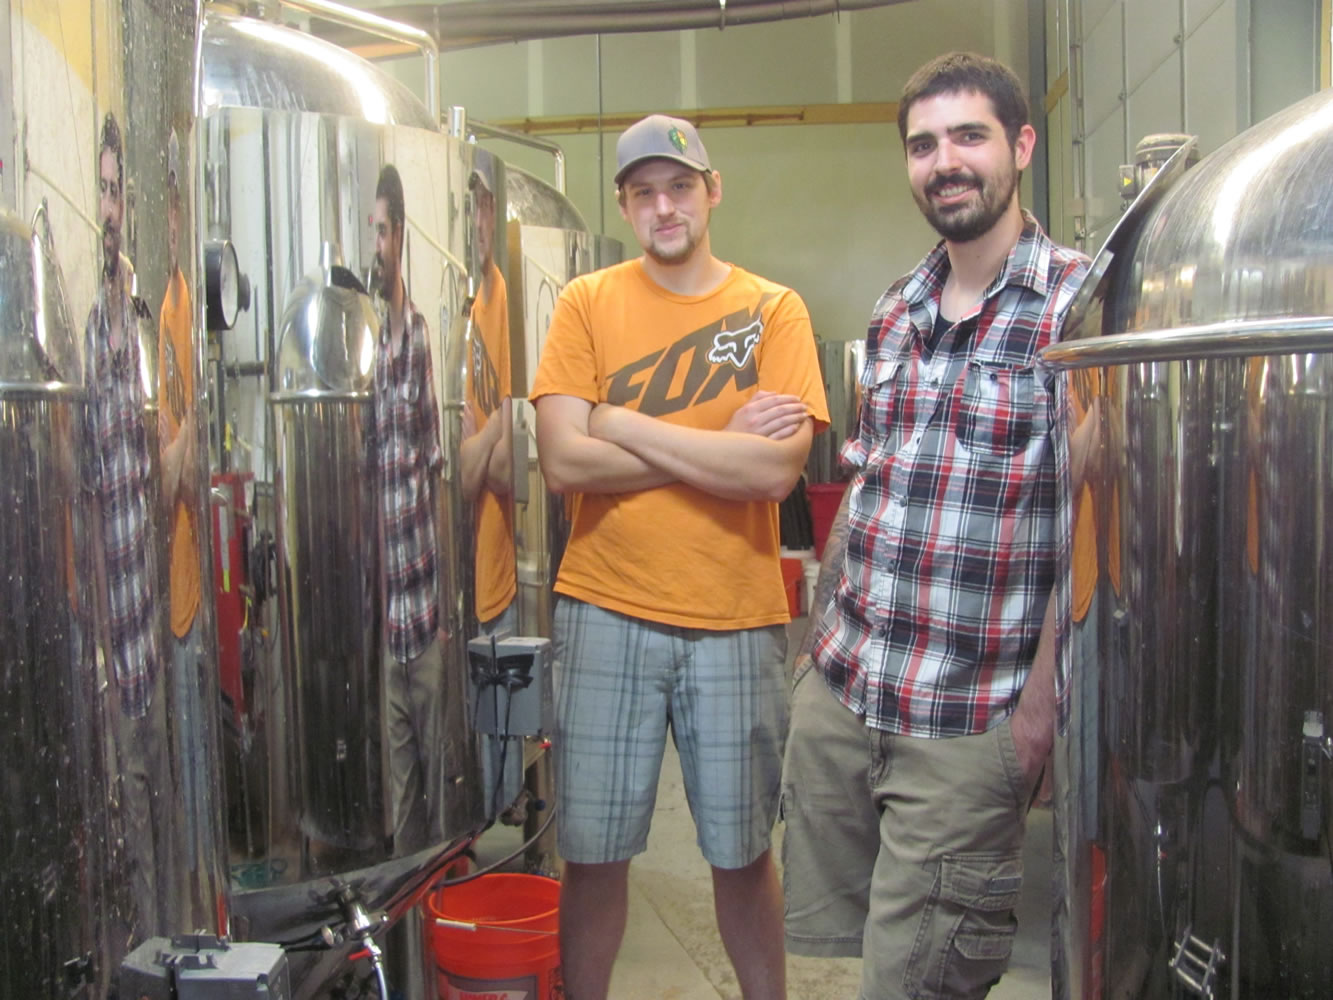 Jake Walton and Erik Cloe, friends who met in primary school, were inspired by various end of the world predictions when they named their Doomsday Brewing Co., in Washougal.